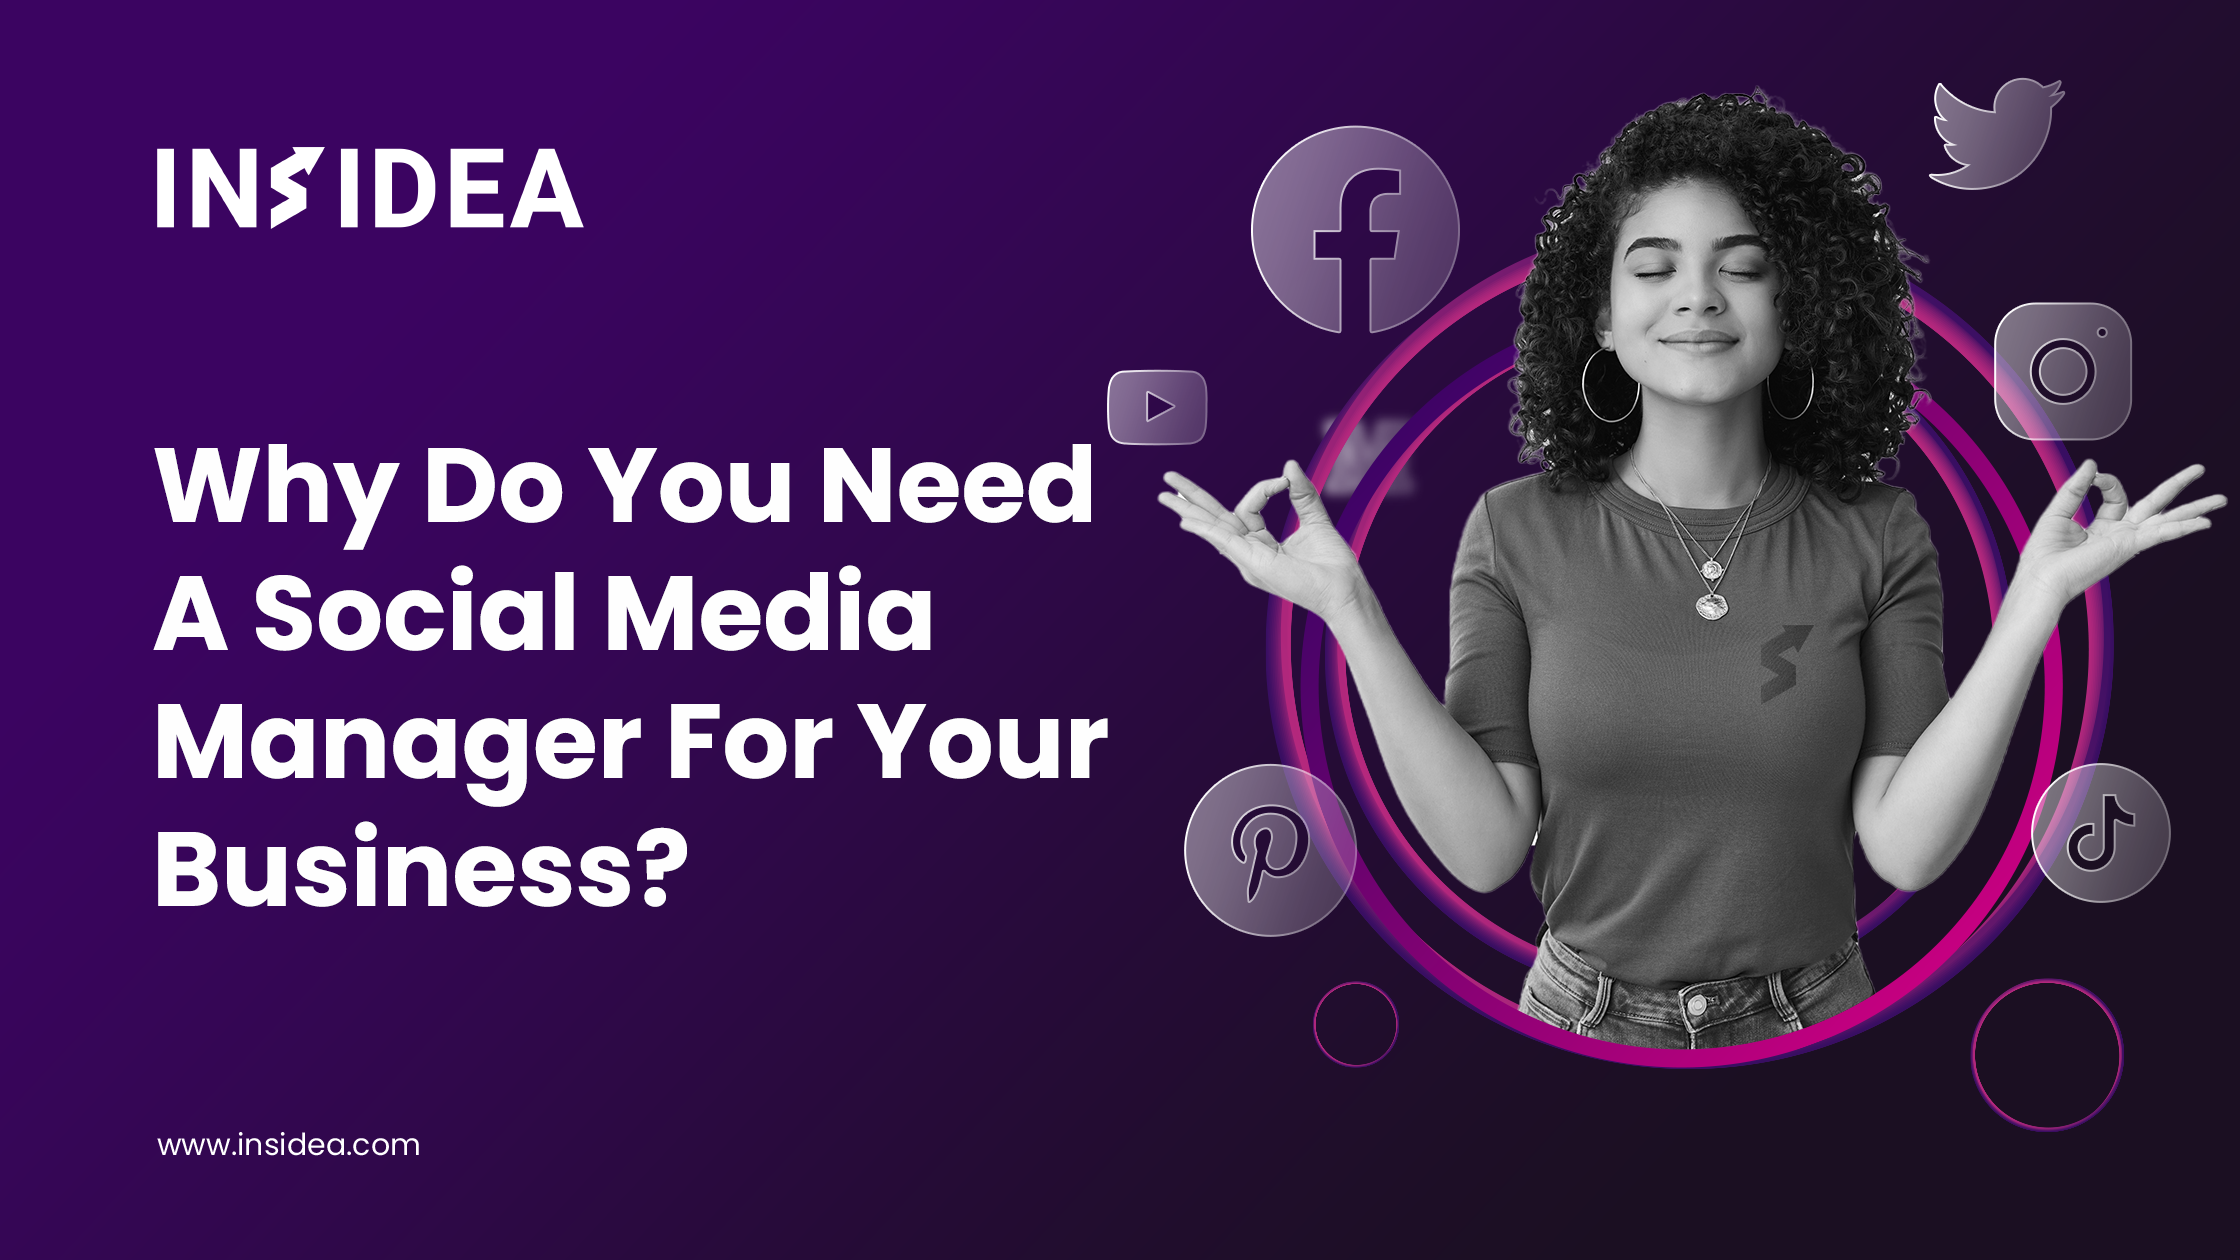 Why Do You Need A Social Media Manager For Your Business